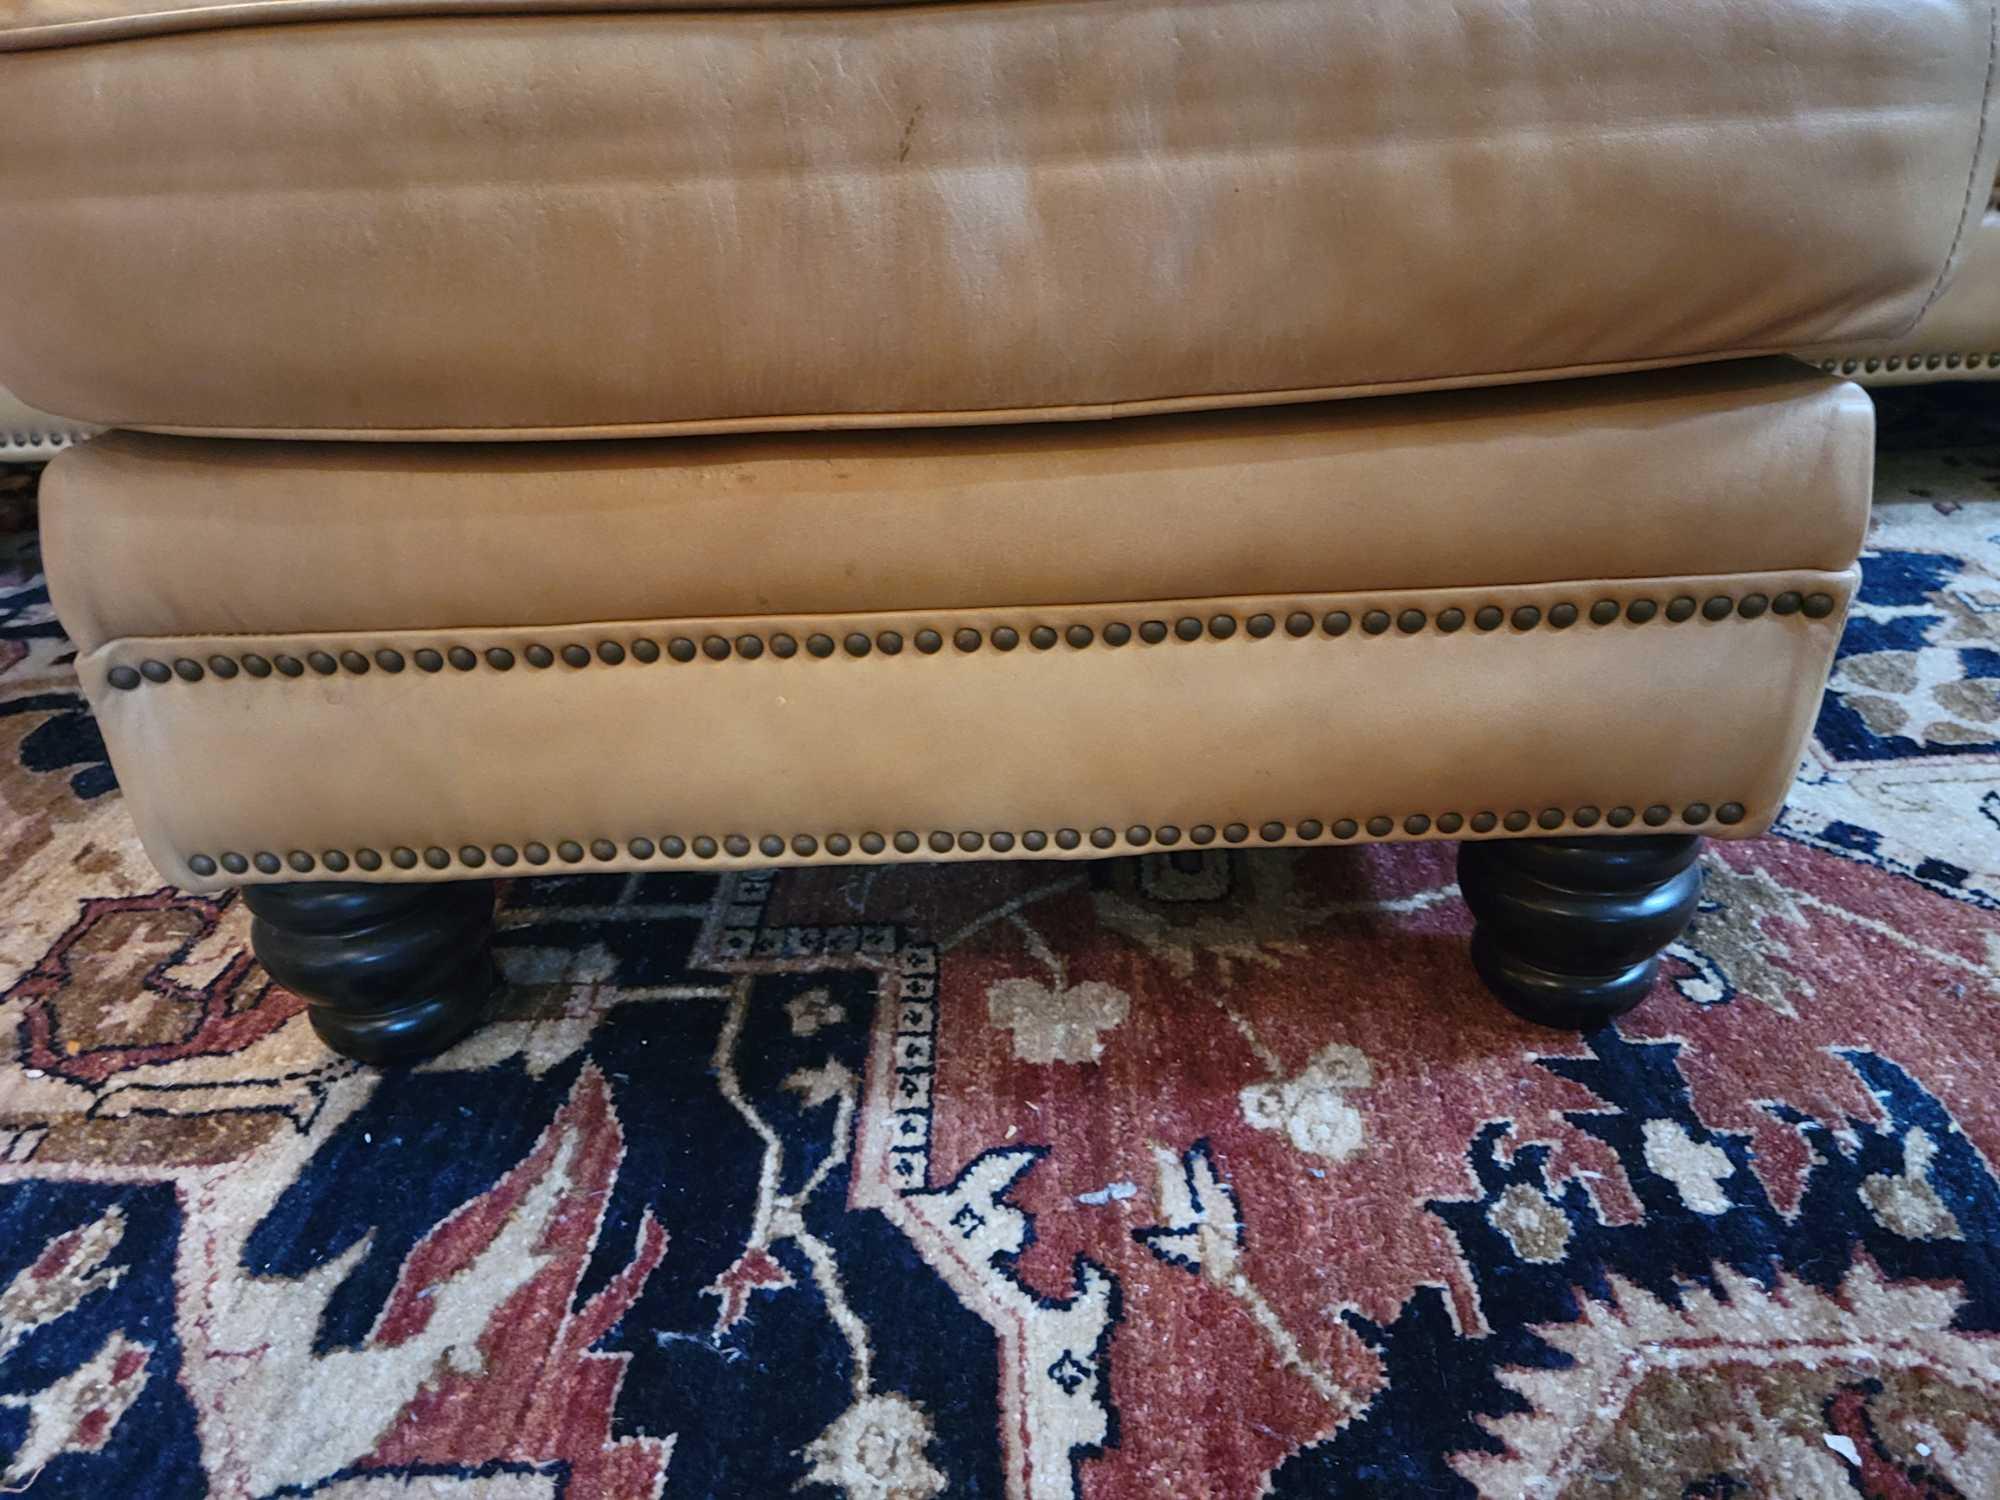 Camel colored Leather couch w matching ottoman